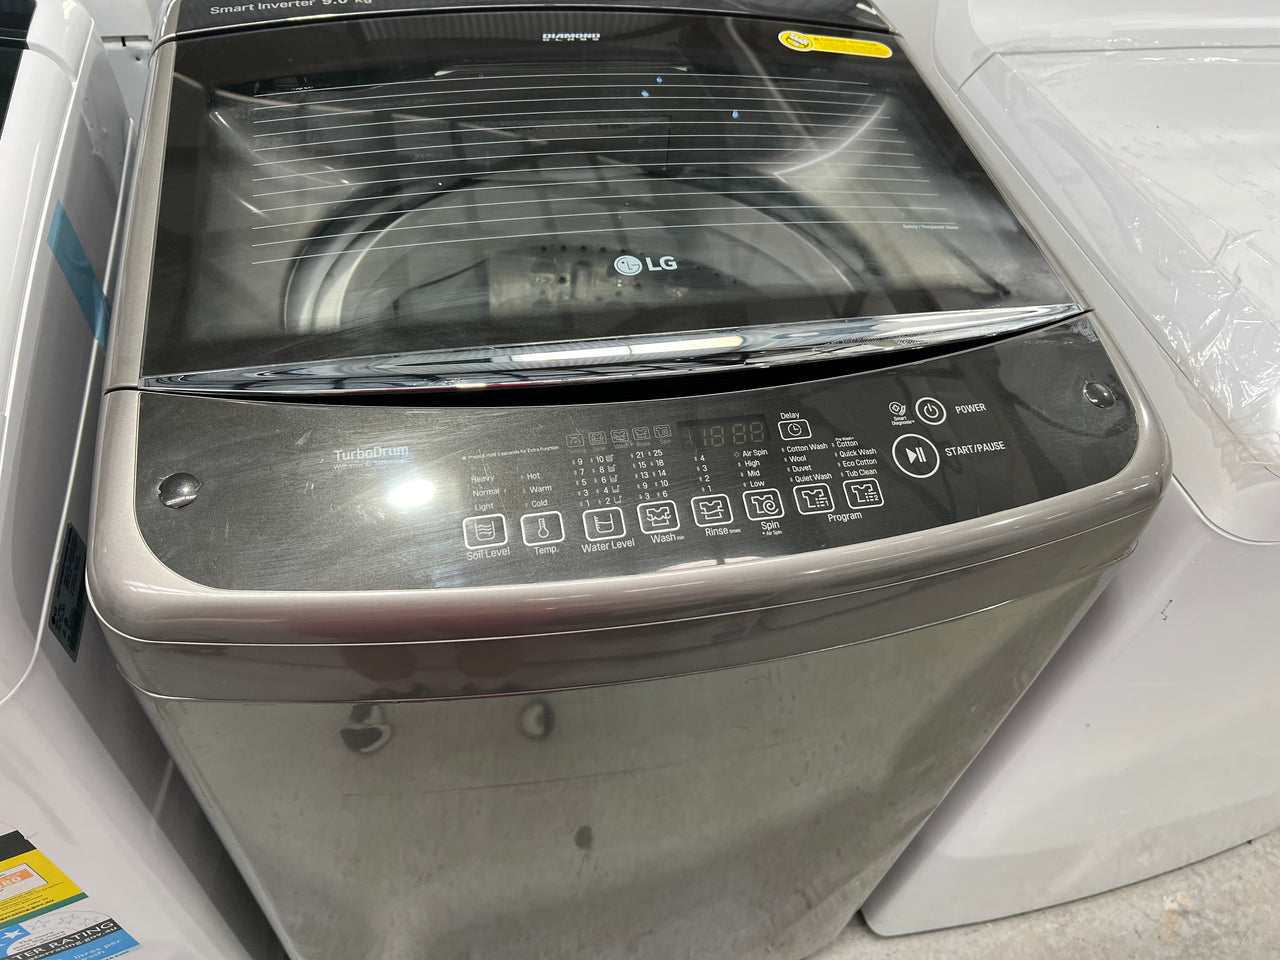 Factory second LG WTG9020V 9KG TOP LOAD WASHING MACHINE WITH SMART INVERTER CONTROL (SILVER) - Second Hand Appliances Geebung